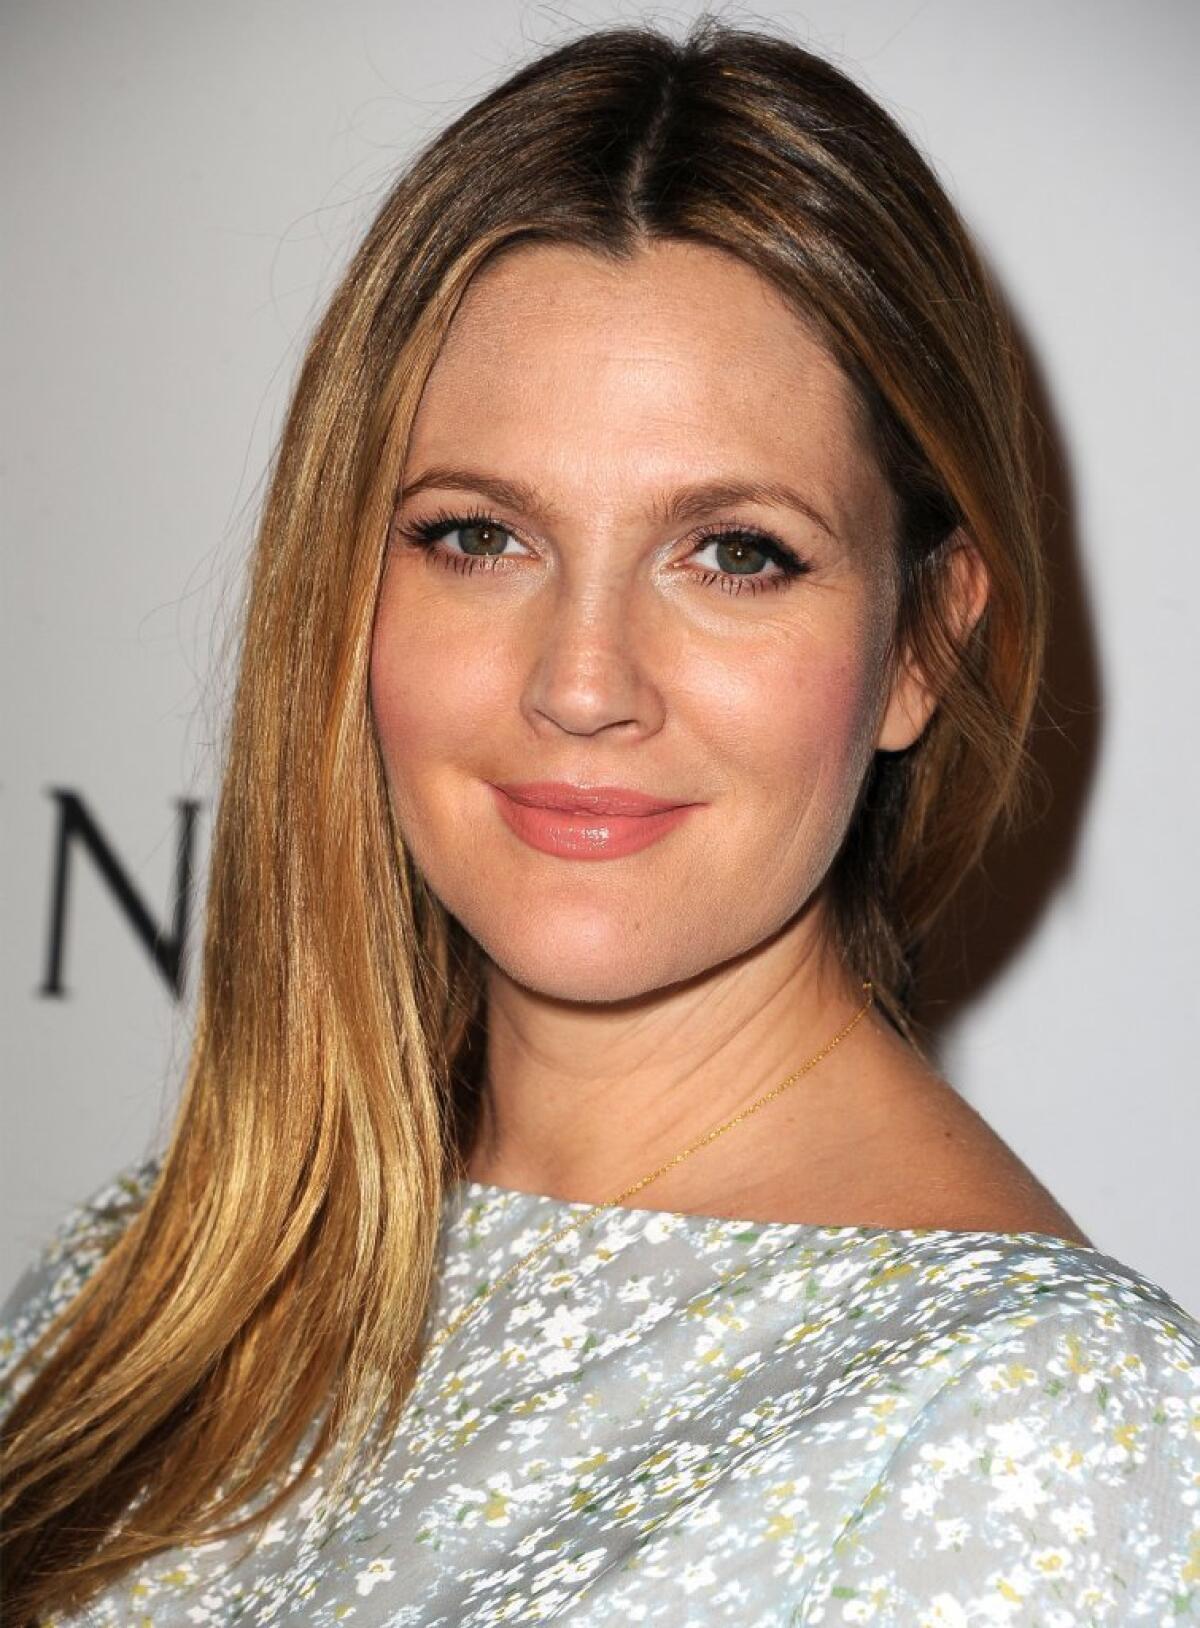 Drew Barrymore is taking on a new role as editor at large for Refinery29.